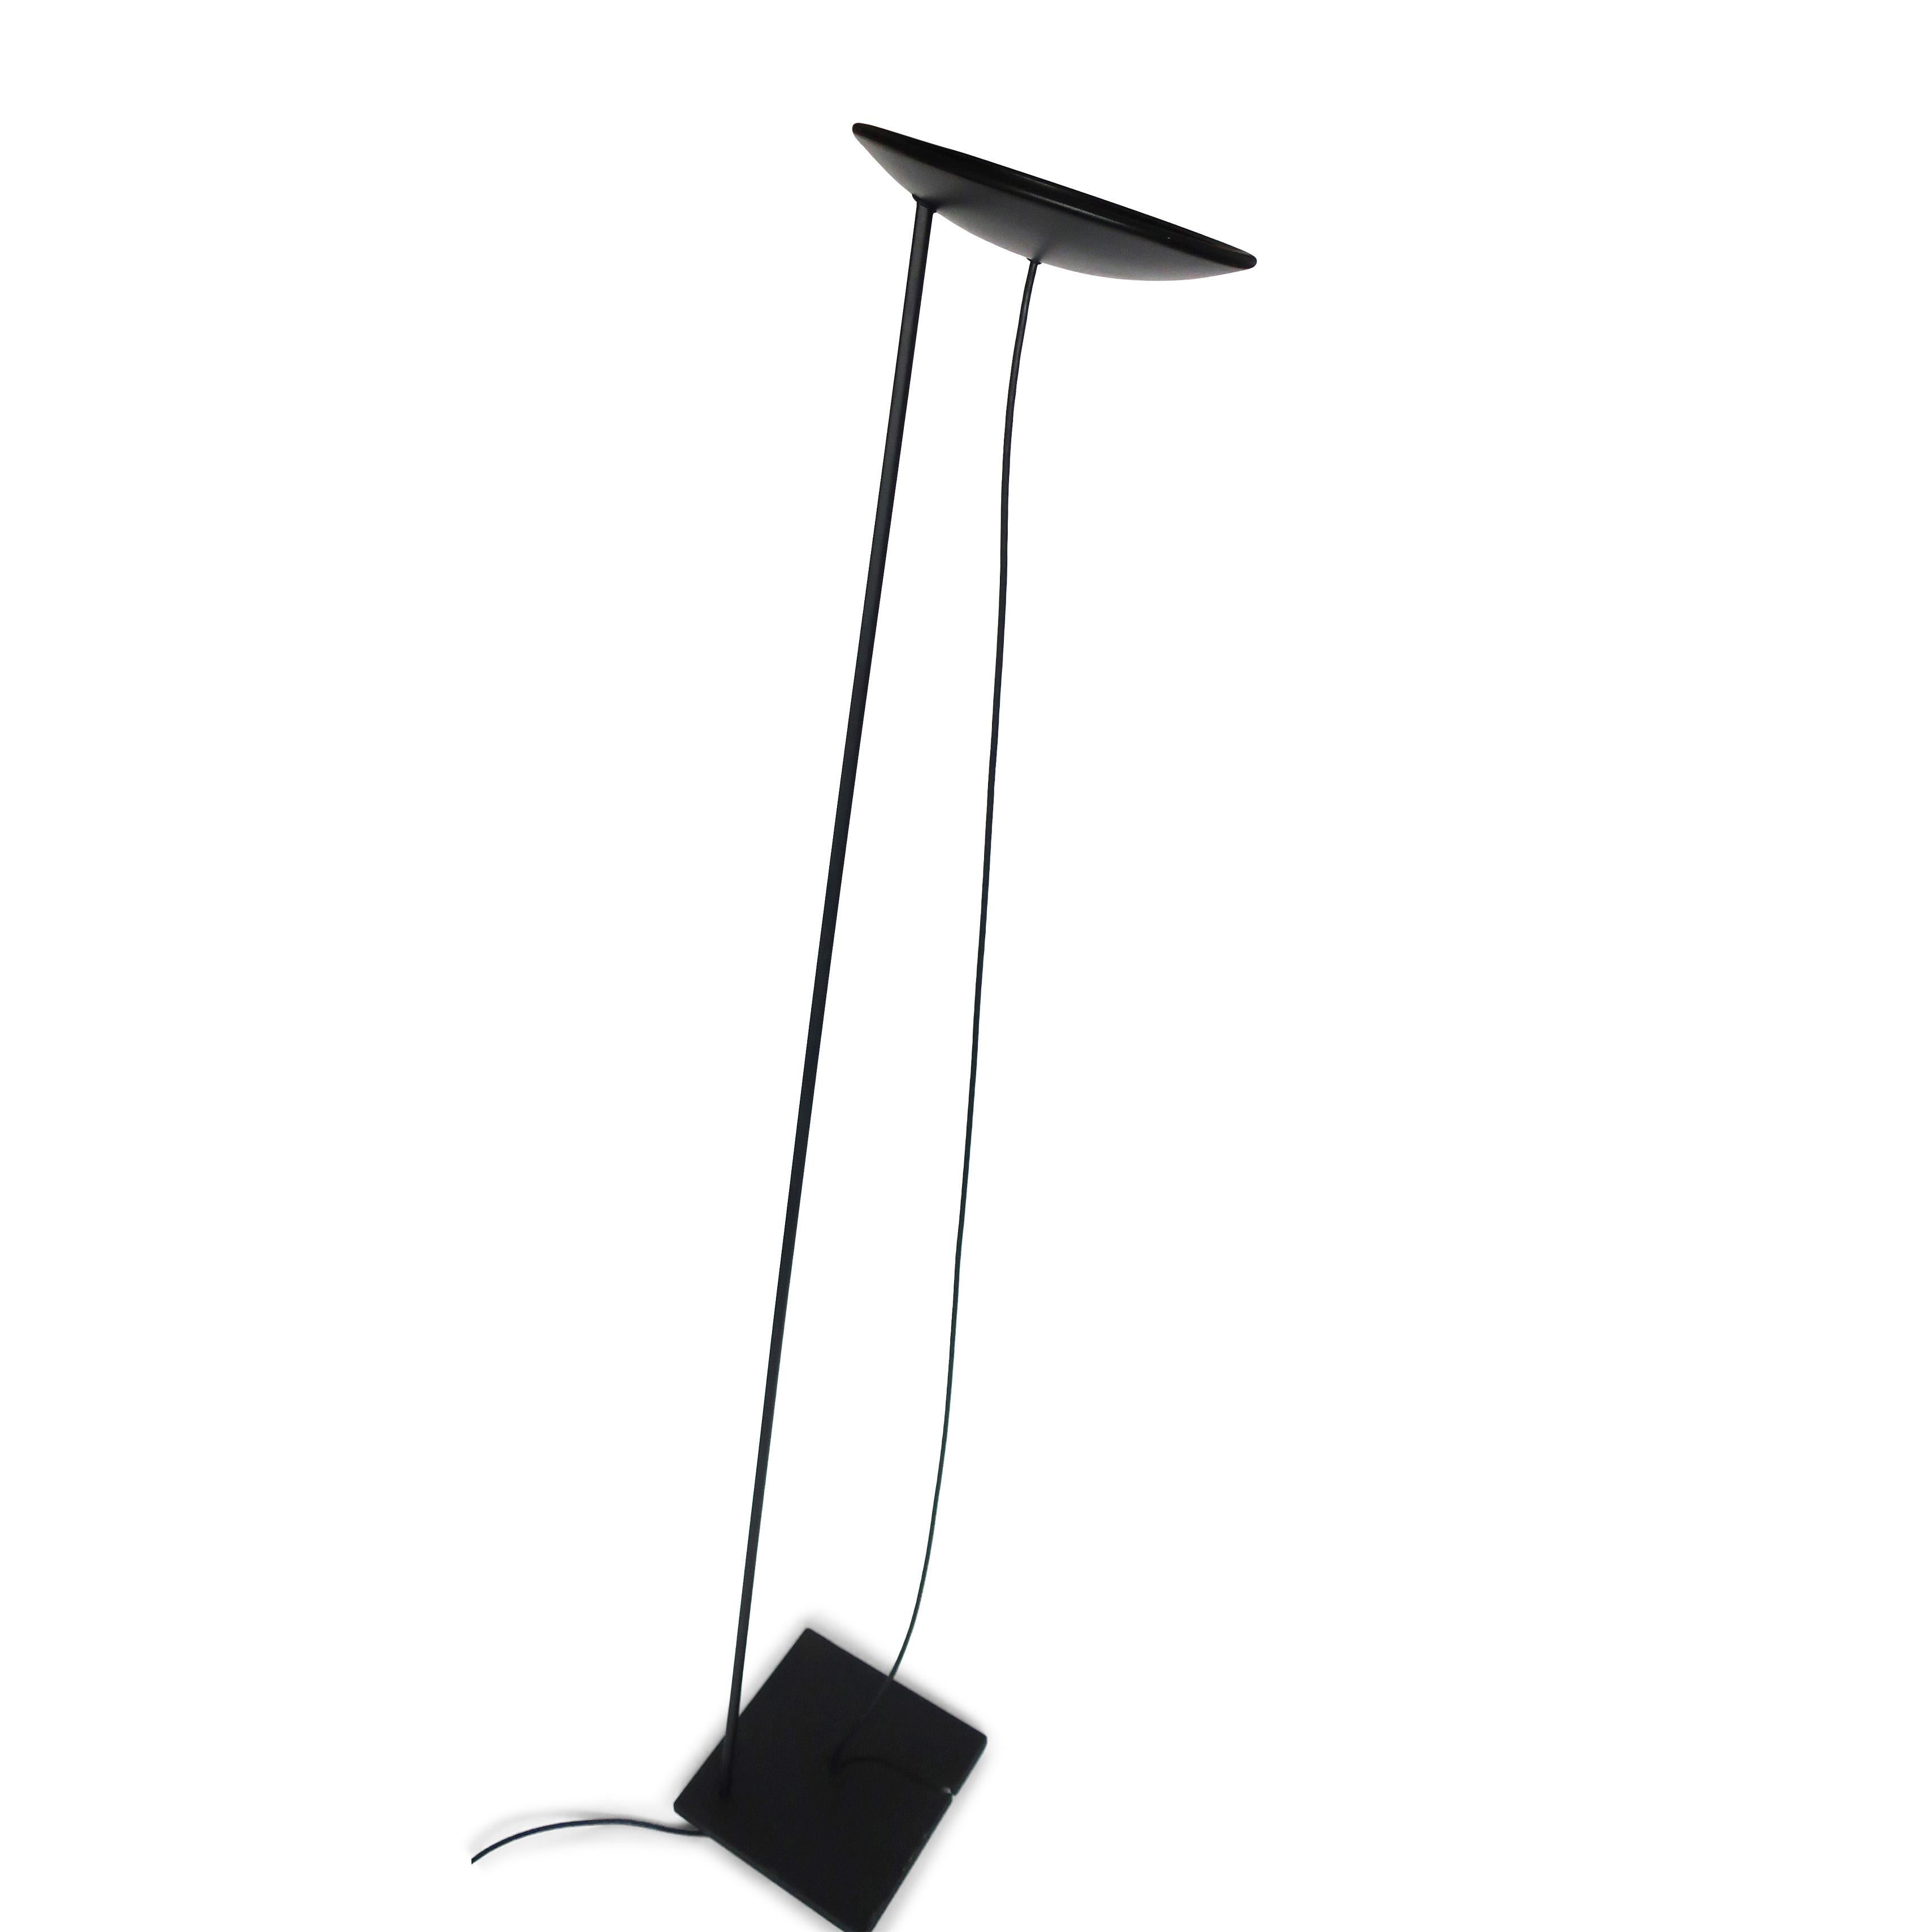 20th Century 1980s Postmodern Tao Floor Lamp by Barbaglia & Colombo for PAF Studio For Sale